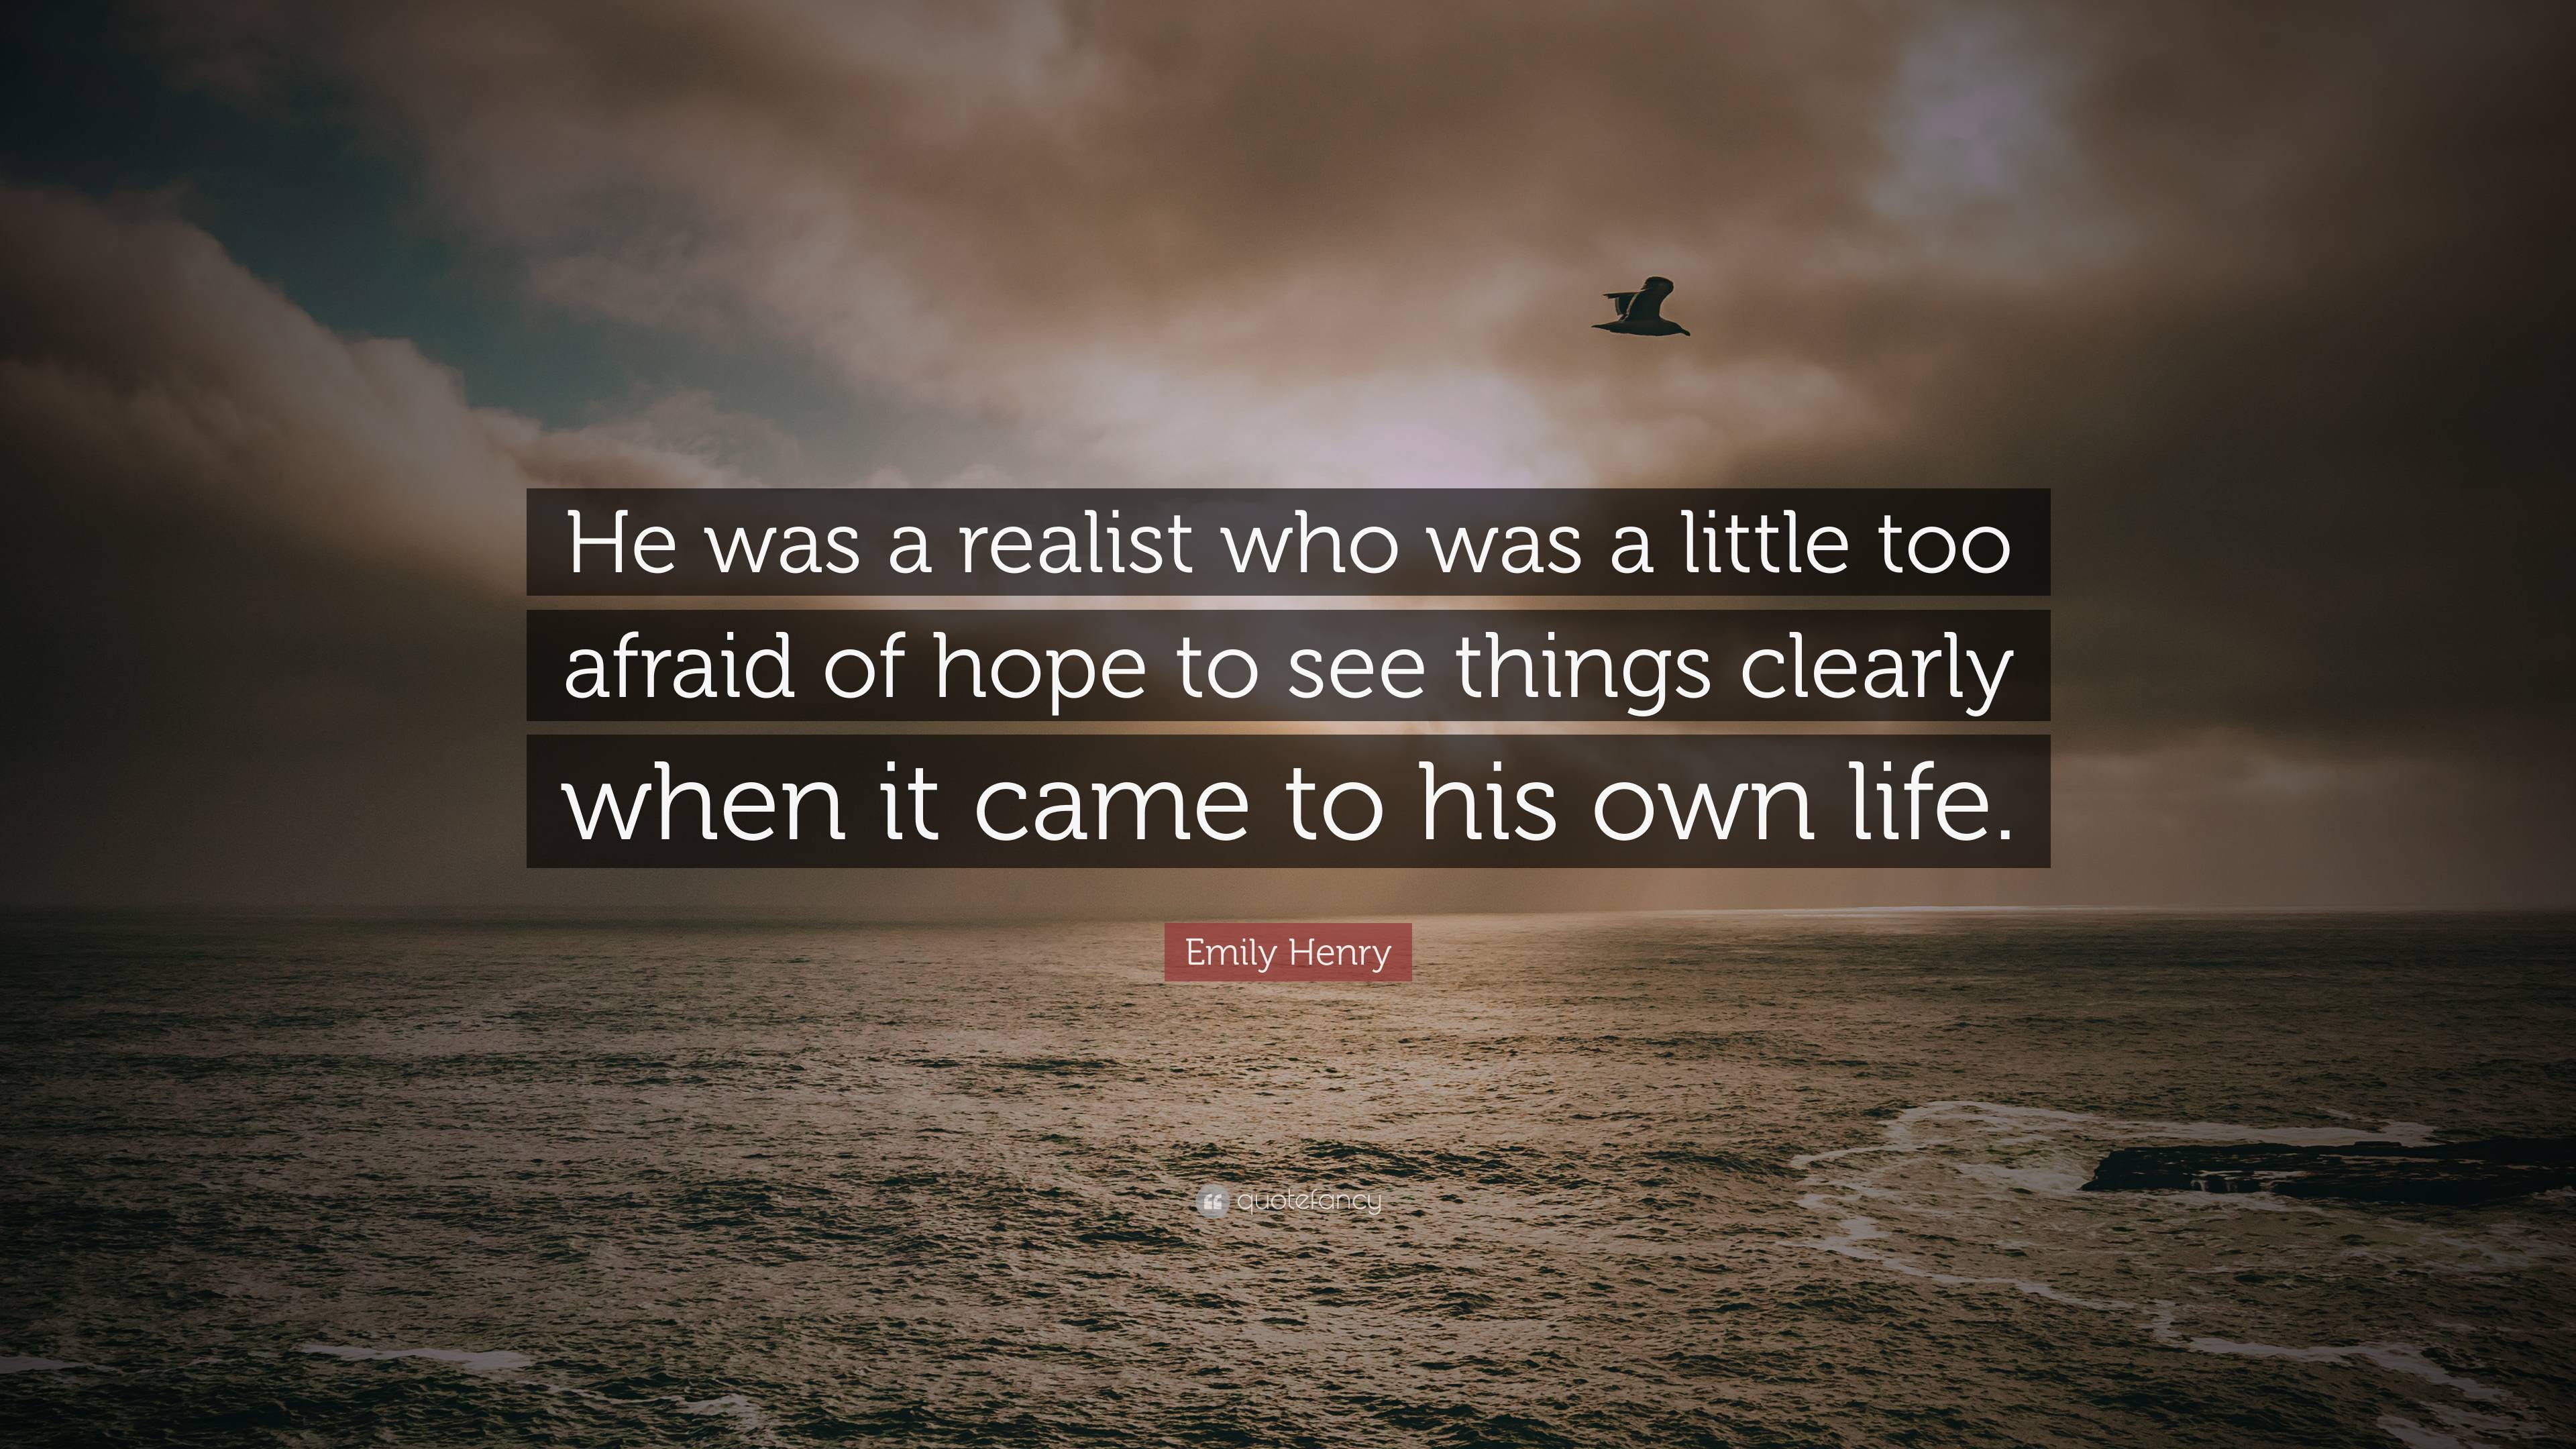 Emily Henry Quote: “He was a realist who was a little too afraid of ...